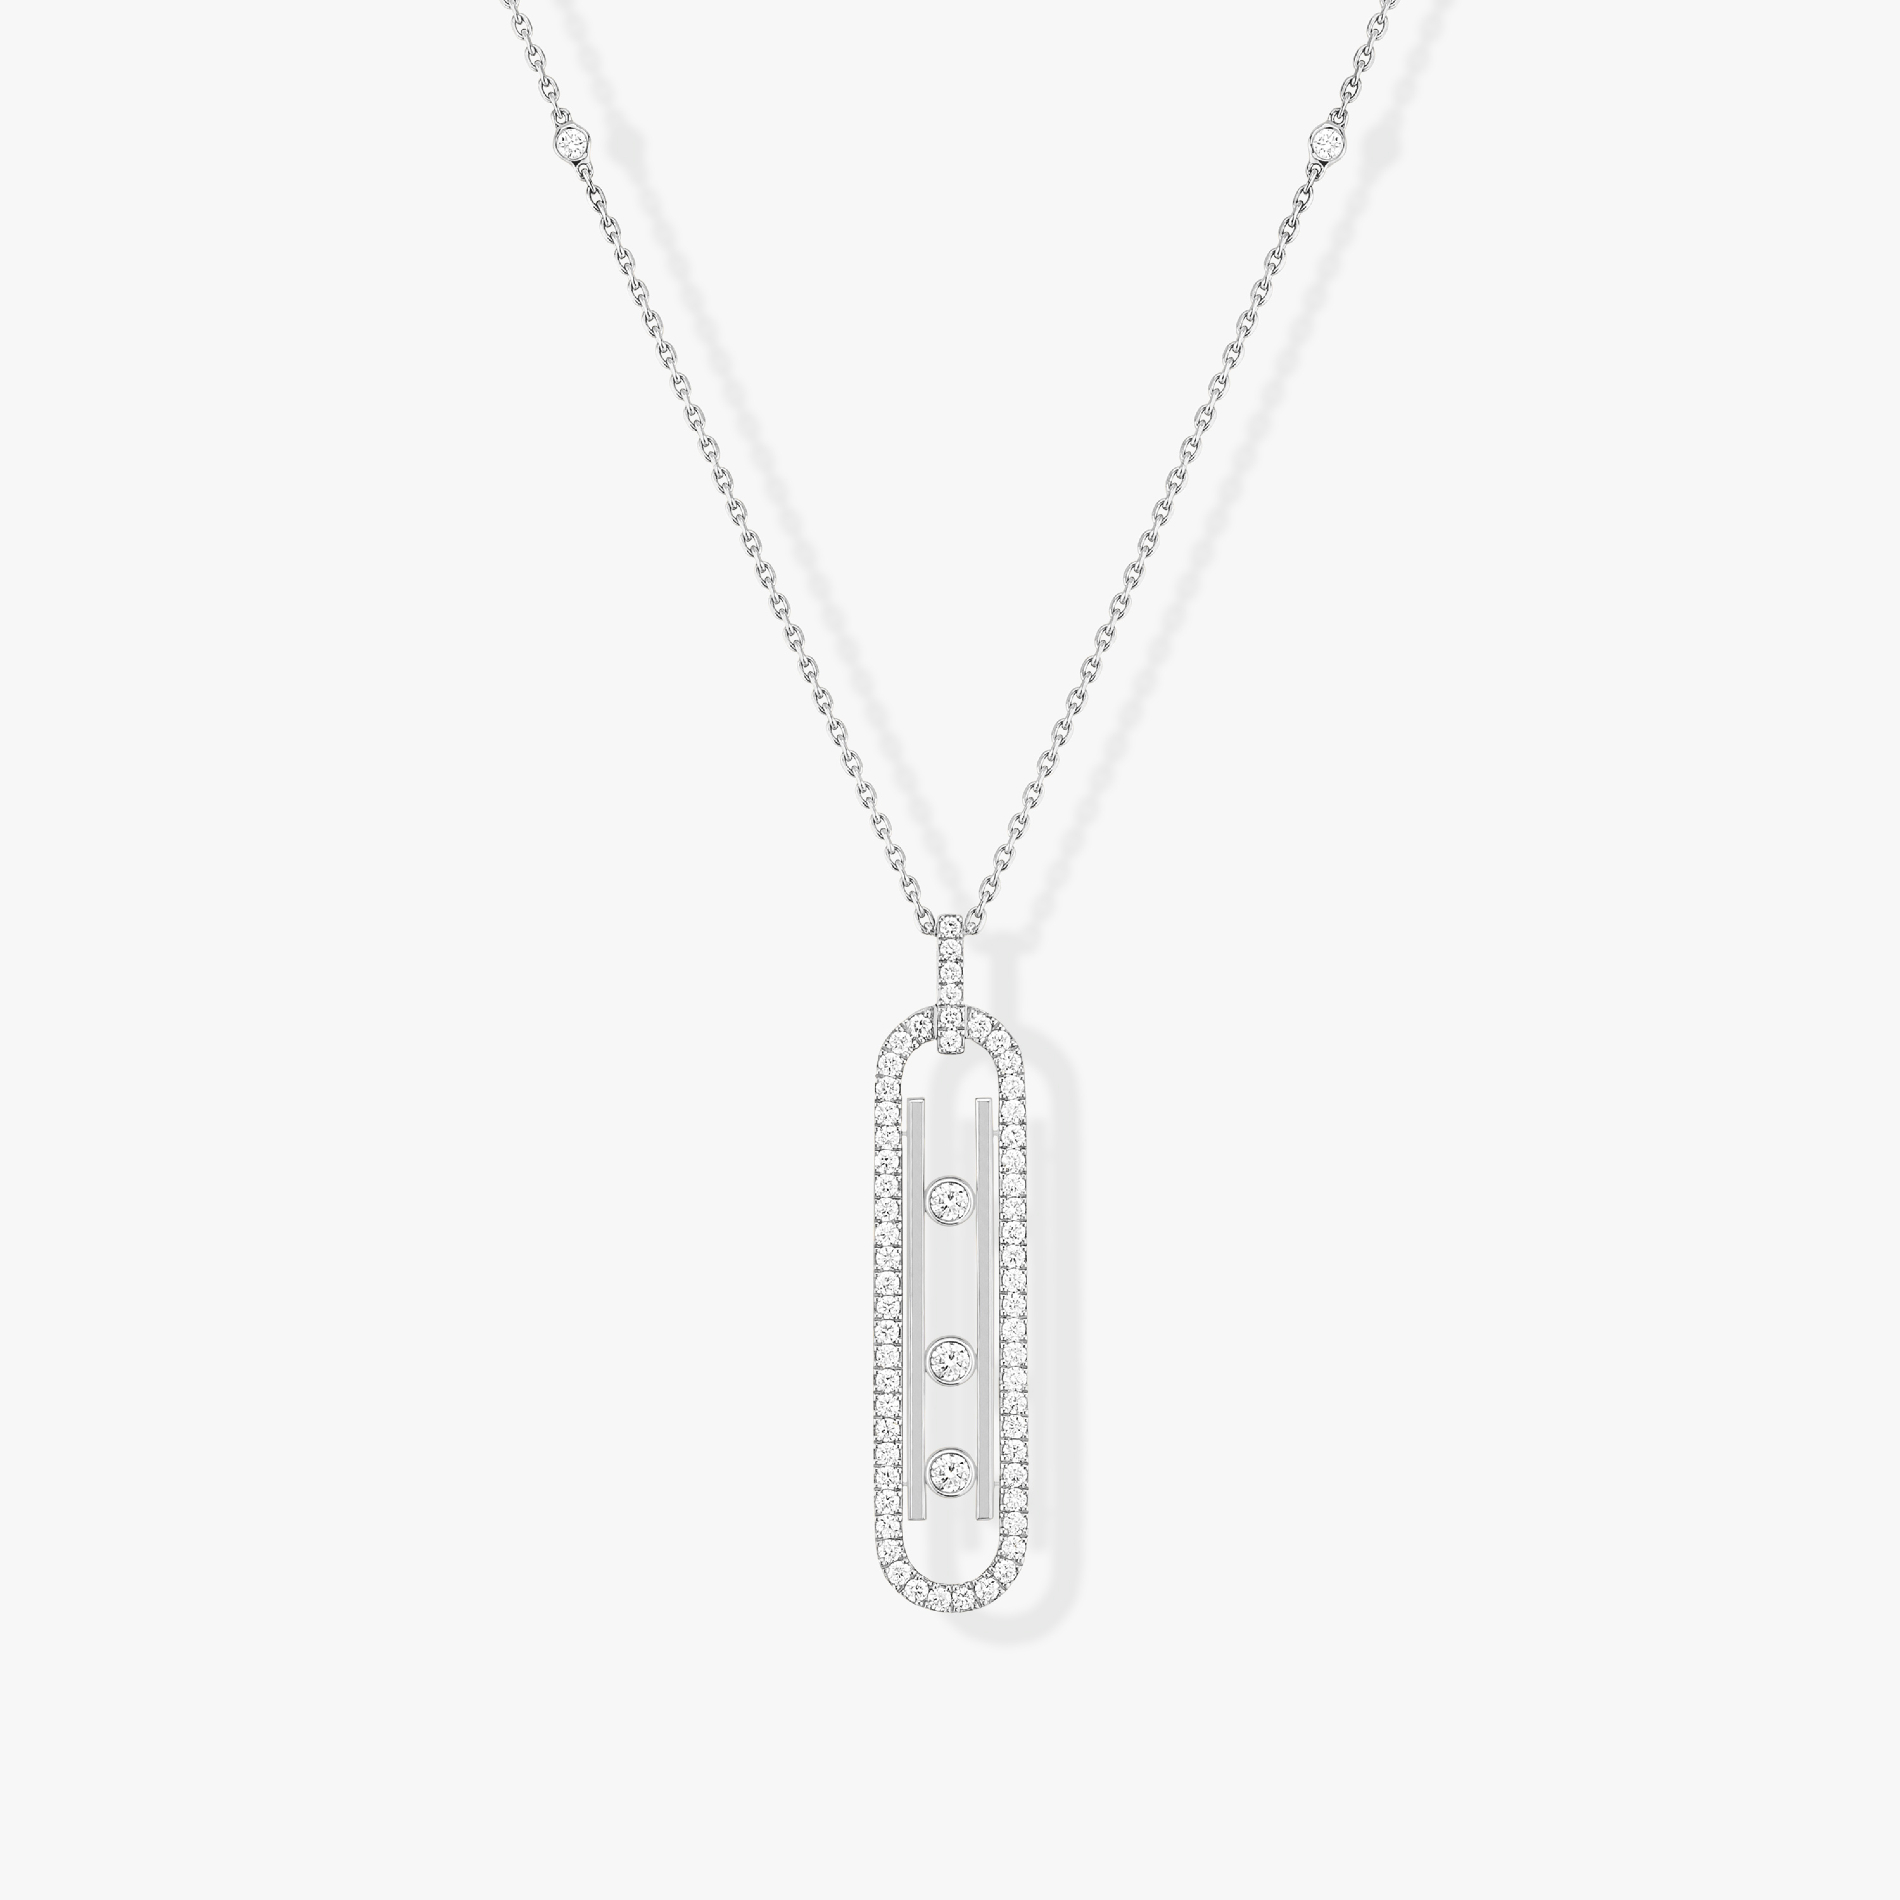 Collier Femme Or Blanc Diamant Collier Move 10th PM  10032-WG